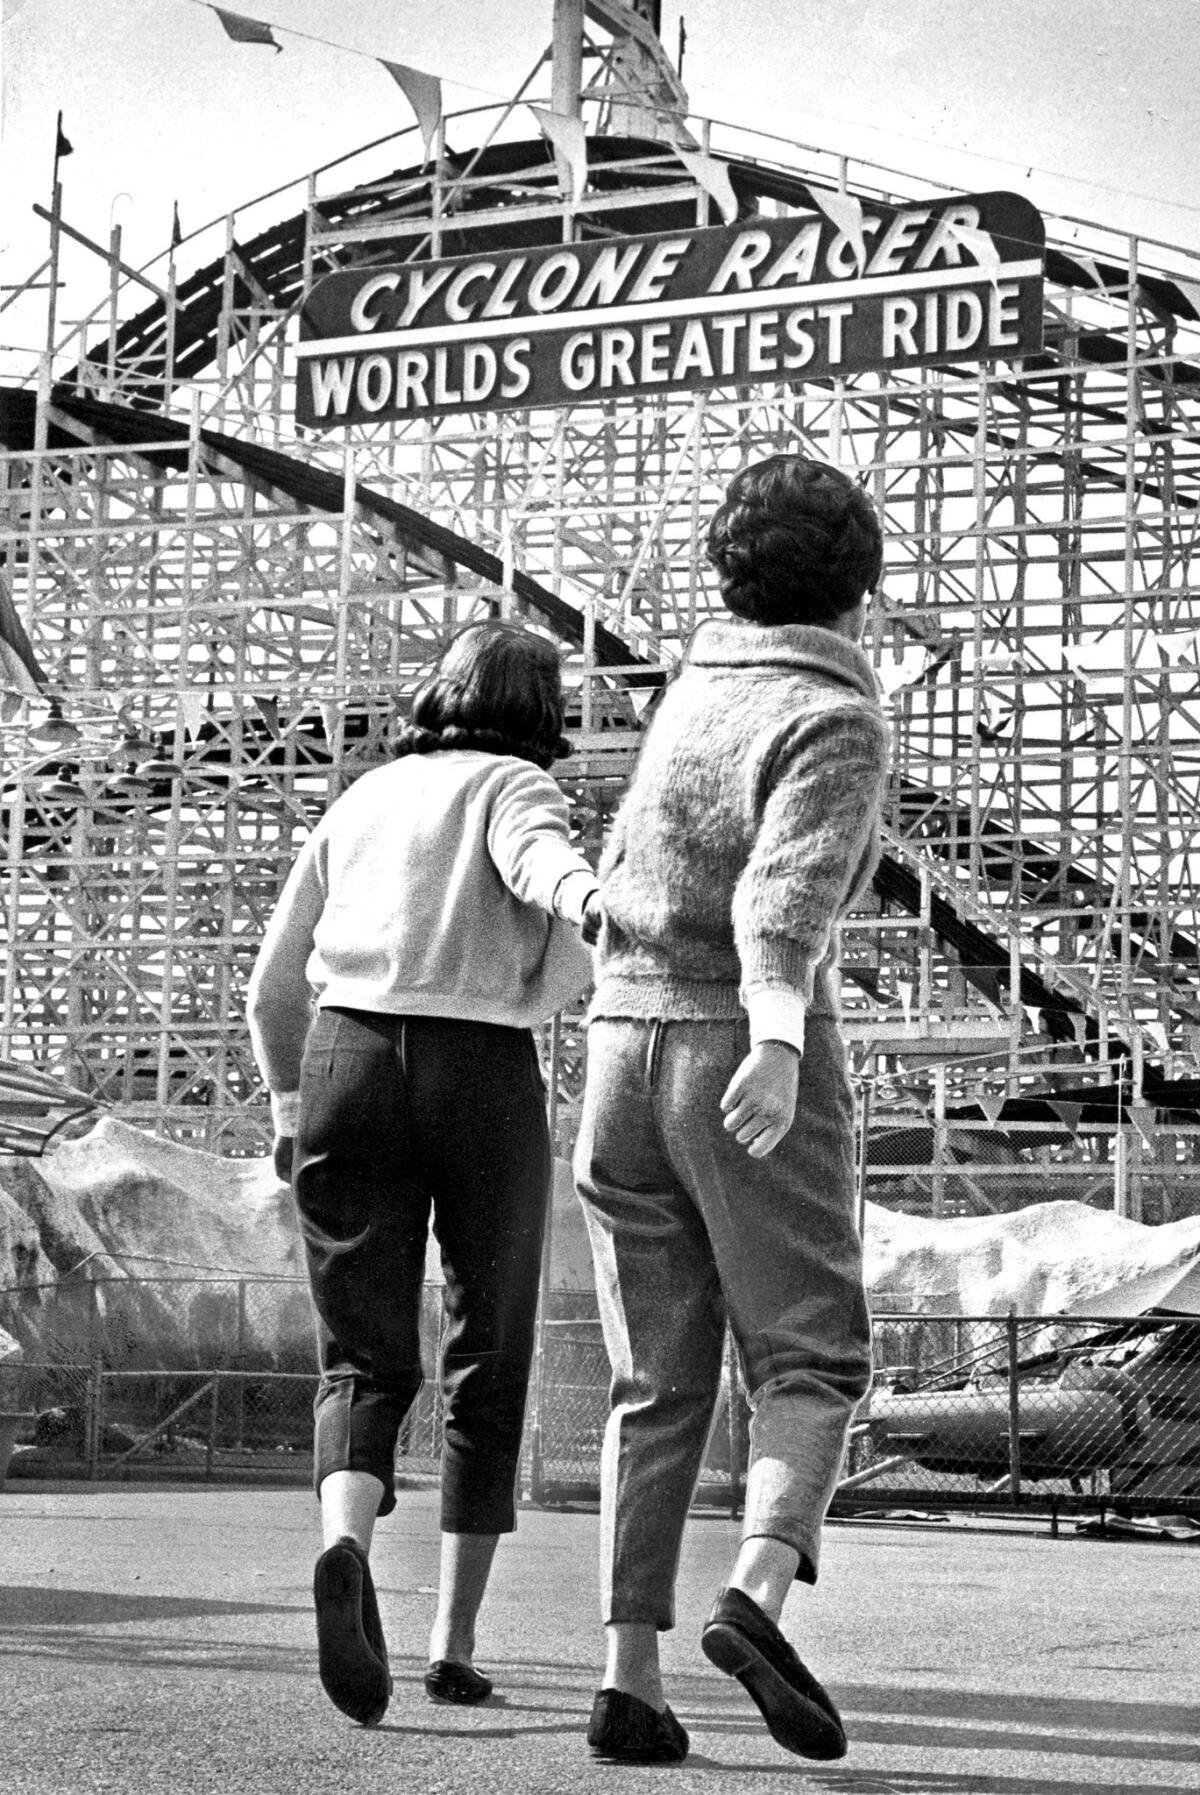 Visitors approach the iconic ride in 1961.